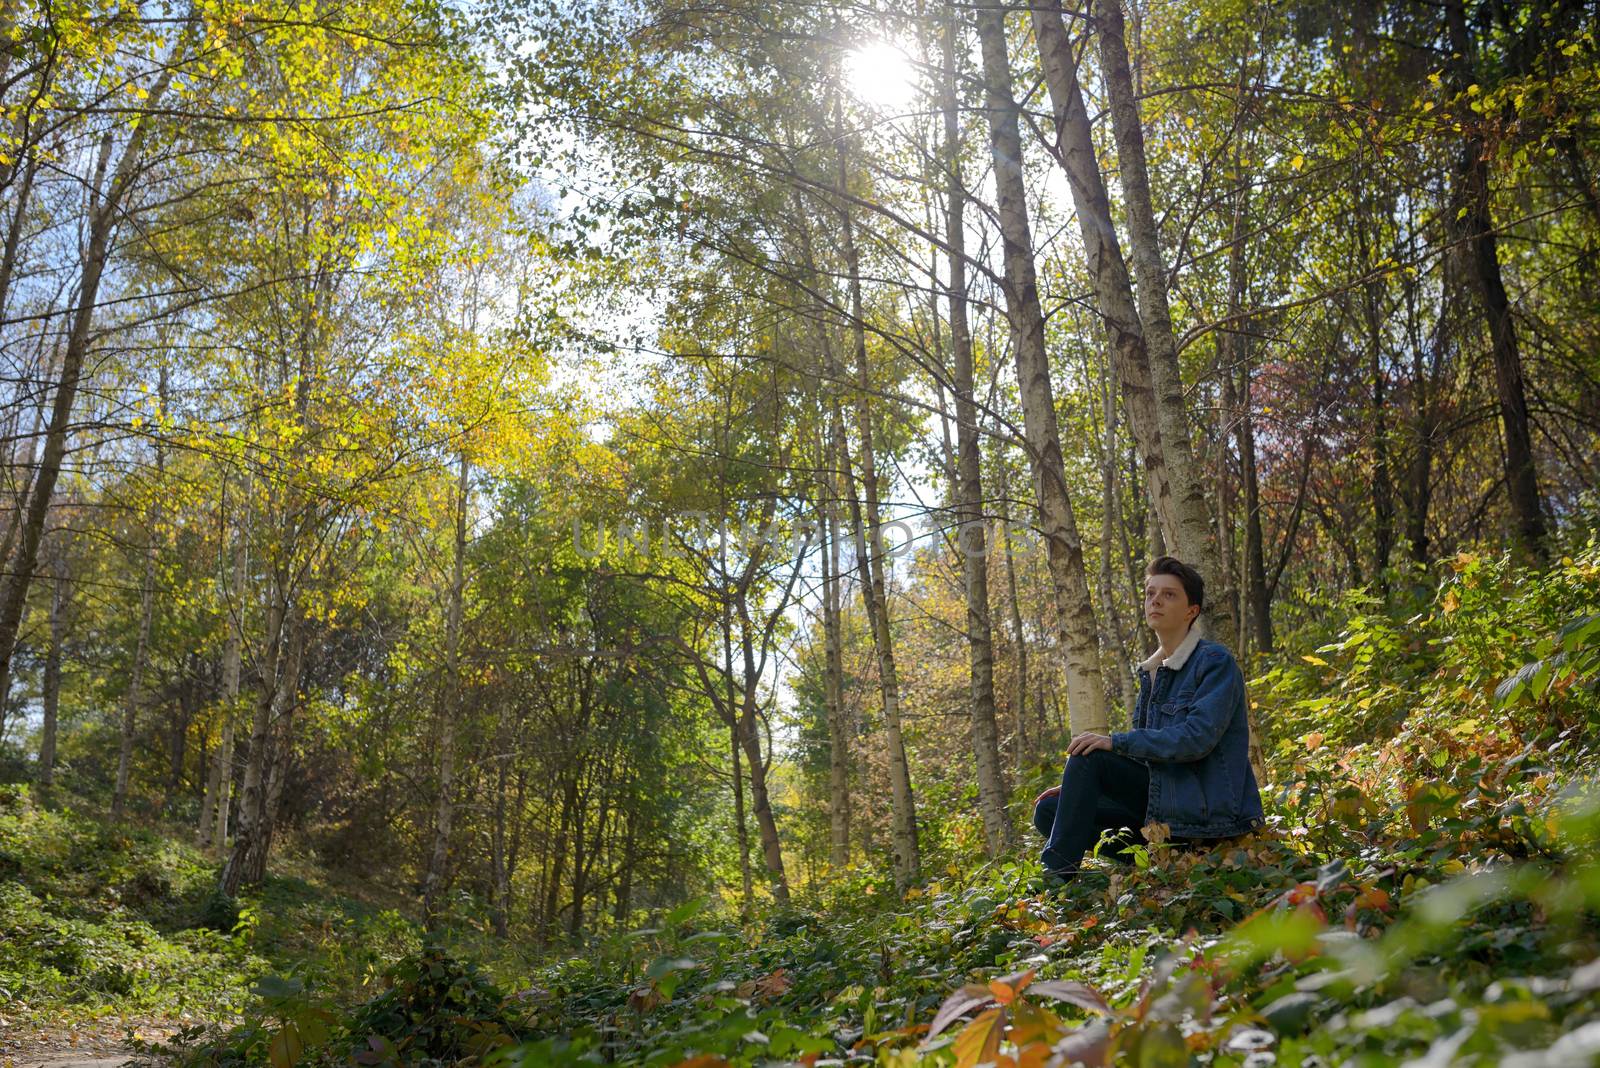 Youth boy alone in beautiful autumn forest